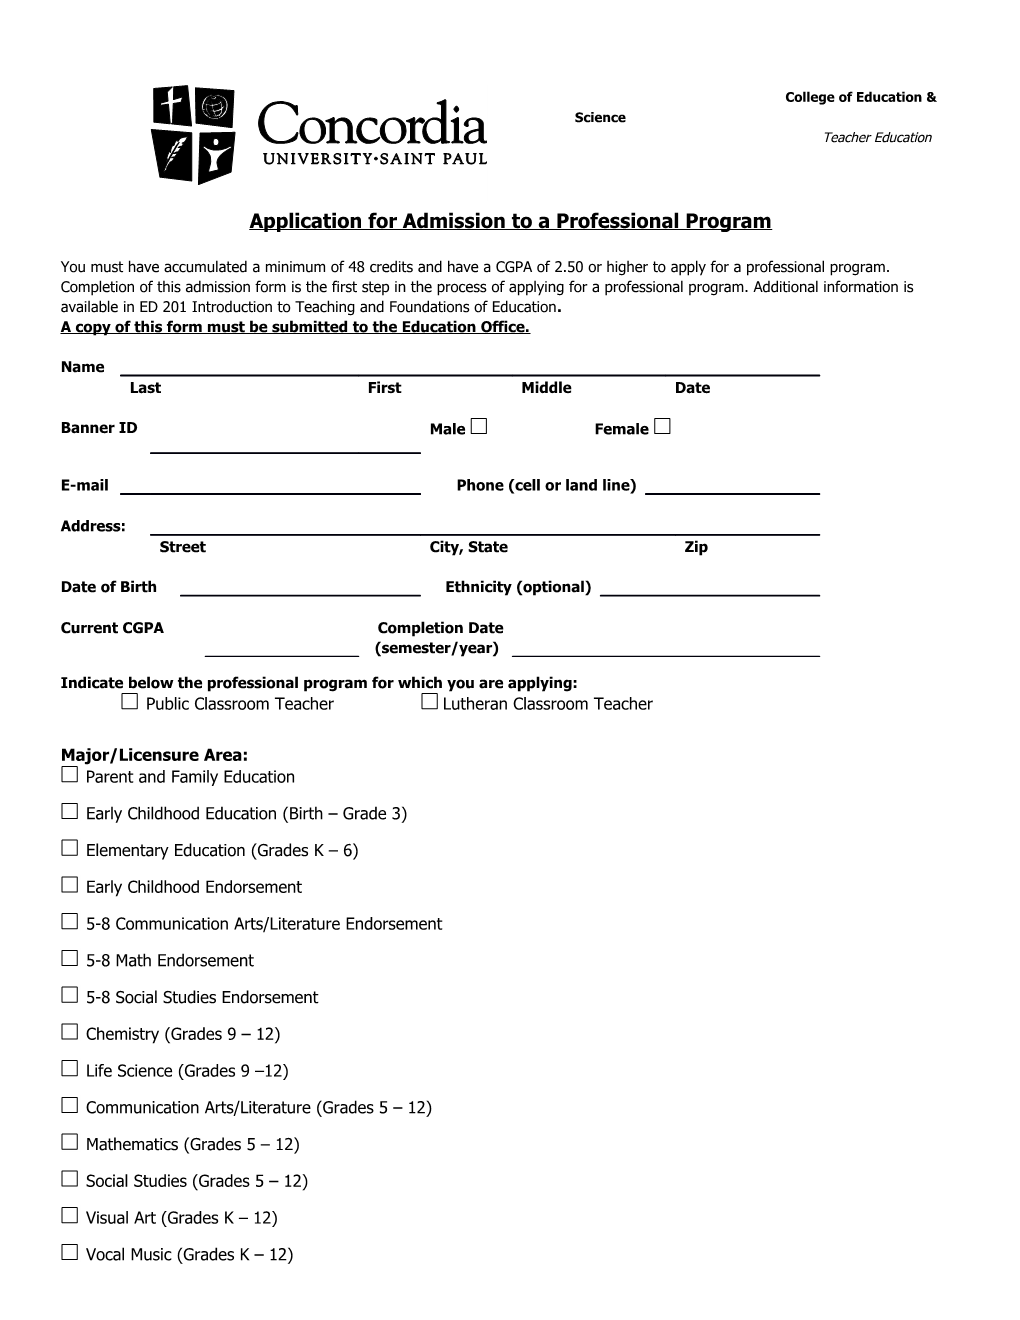 Application for Admission to a Professional Program